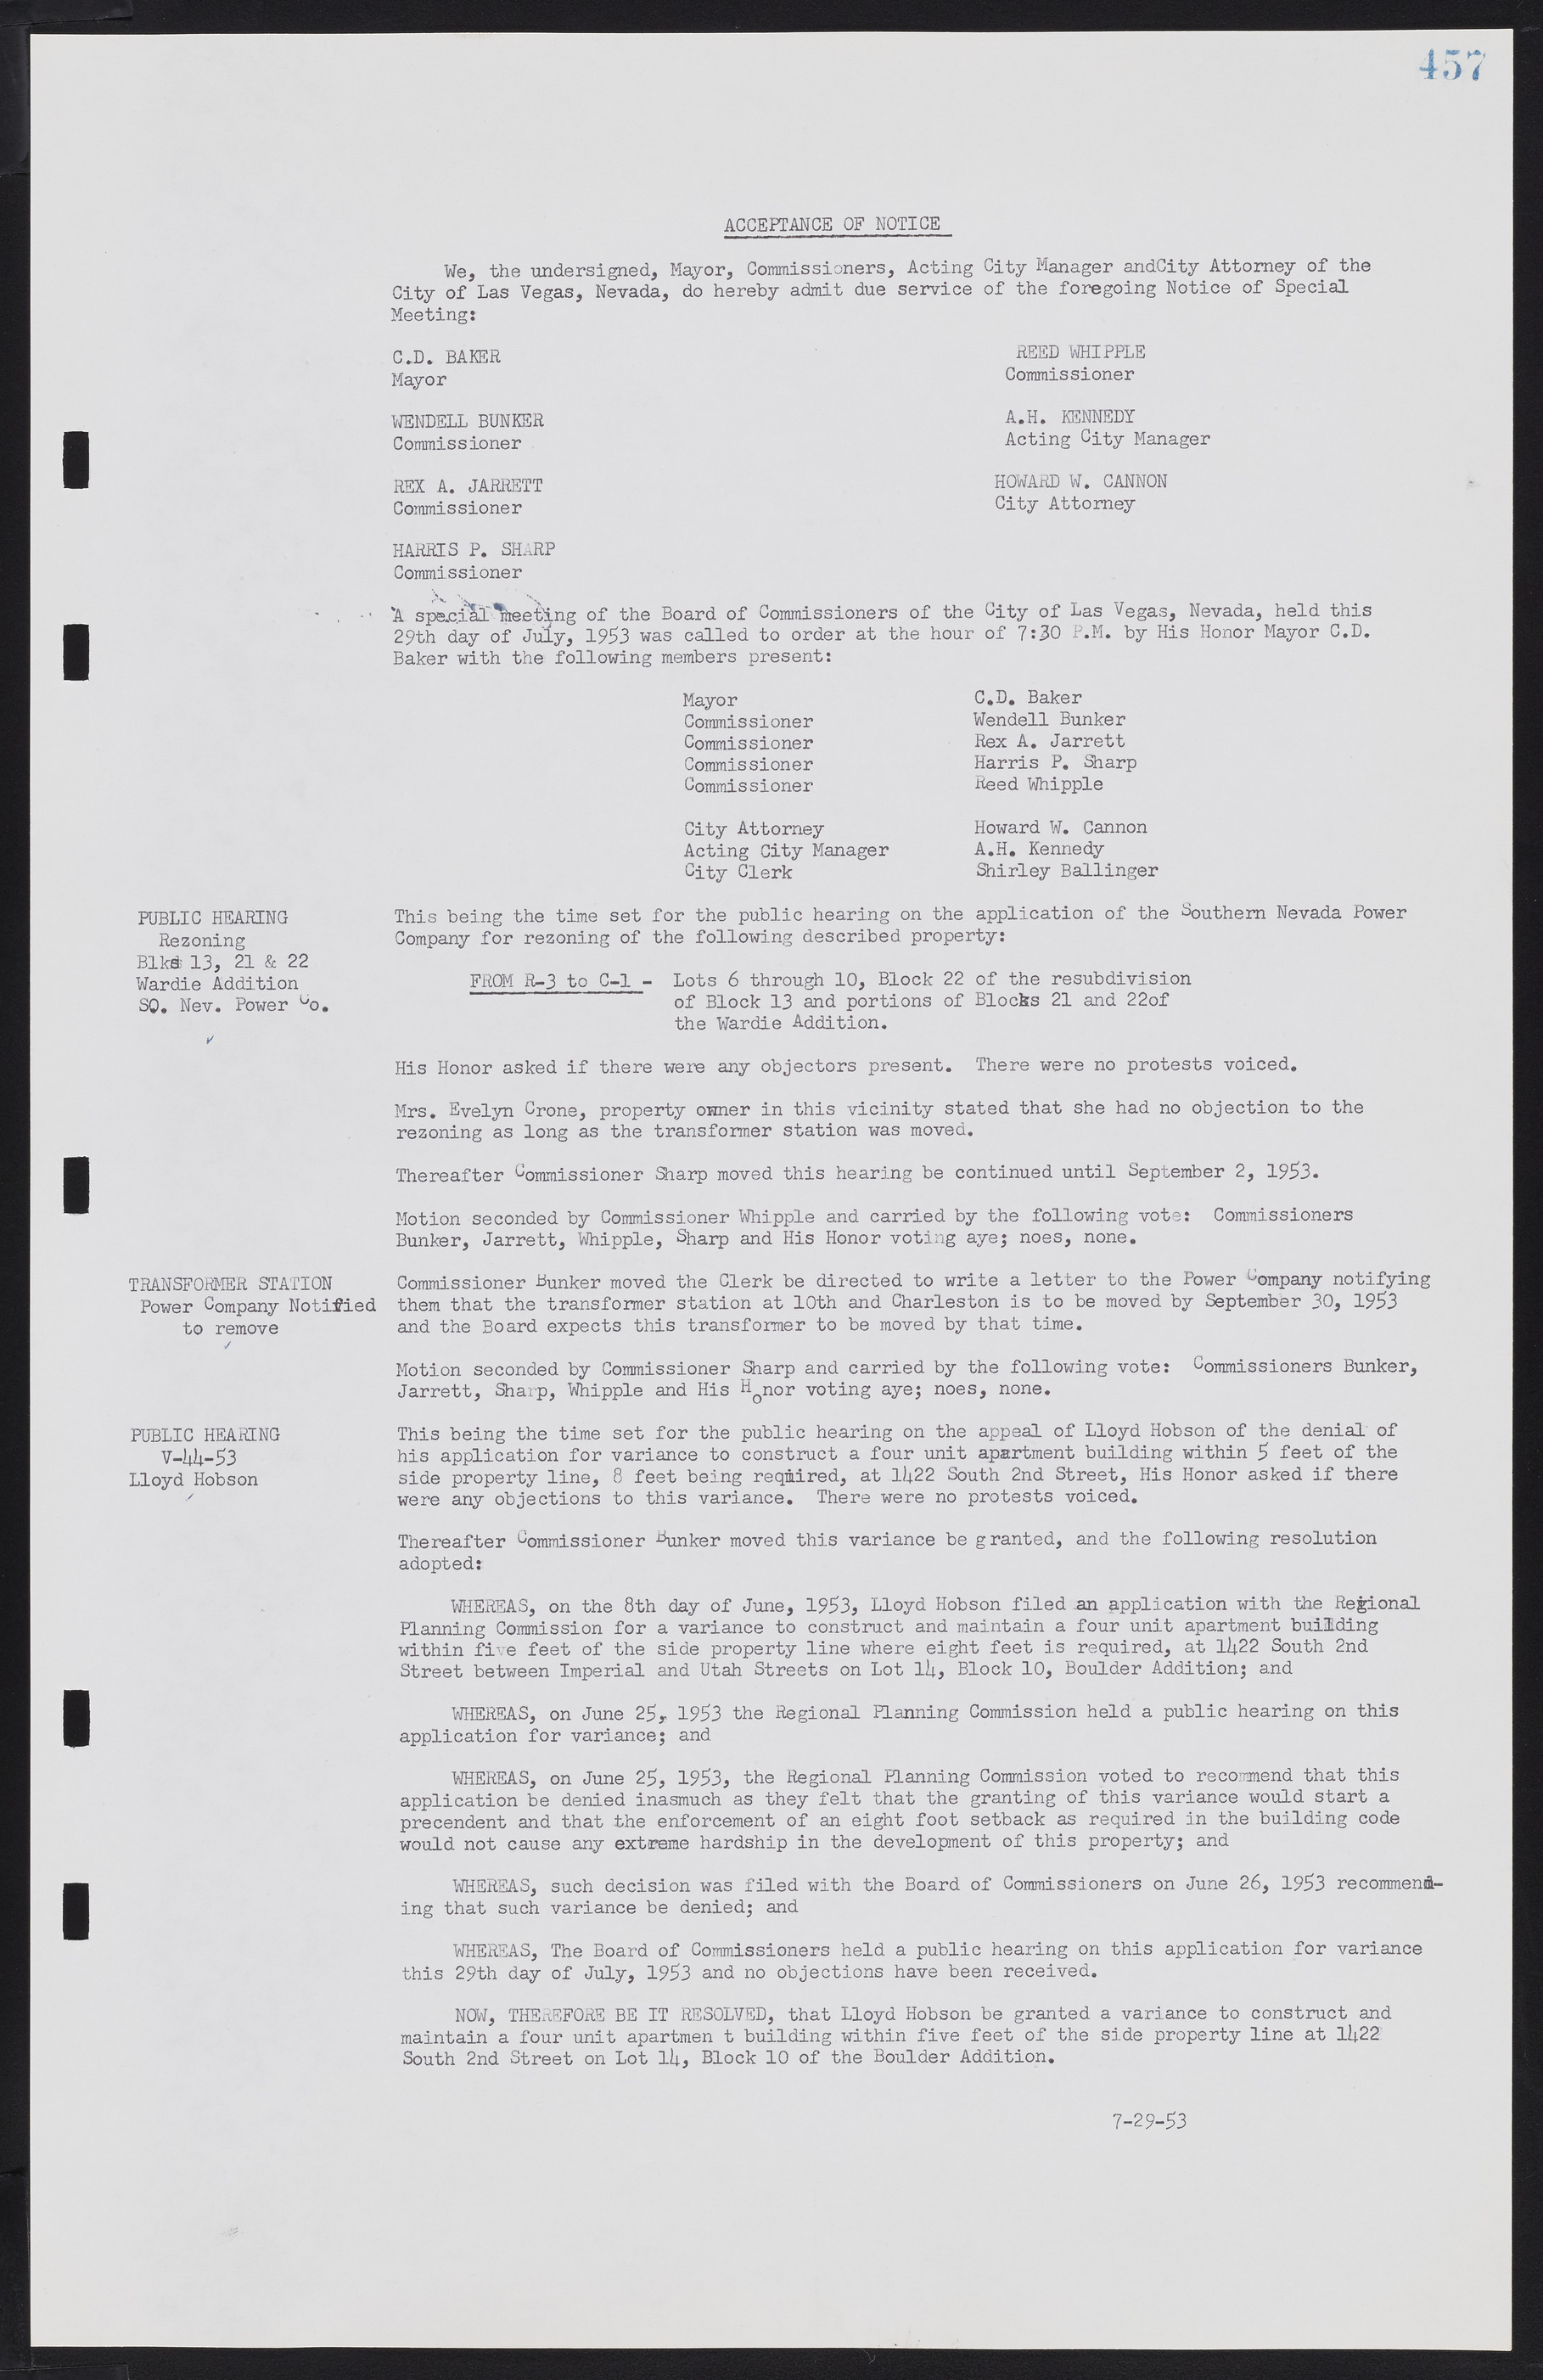 Las Vegas City Commission Minutes, May 26, 1952 to February 17, 1954, lvc000008-487